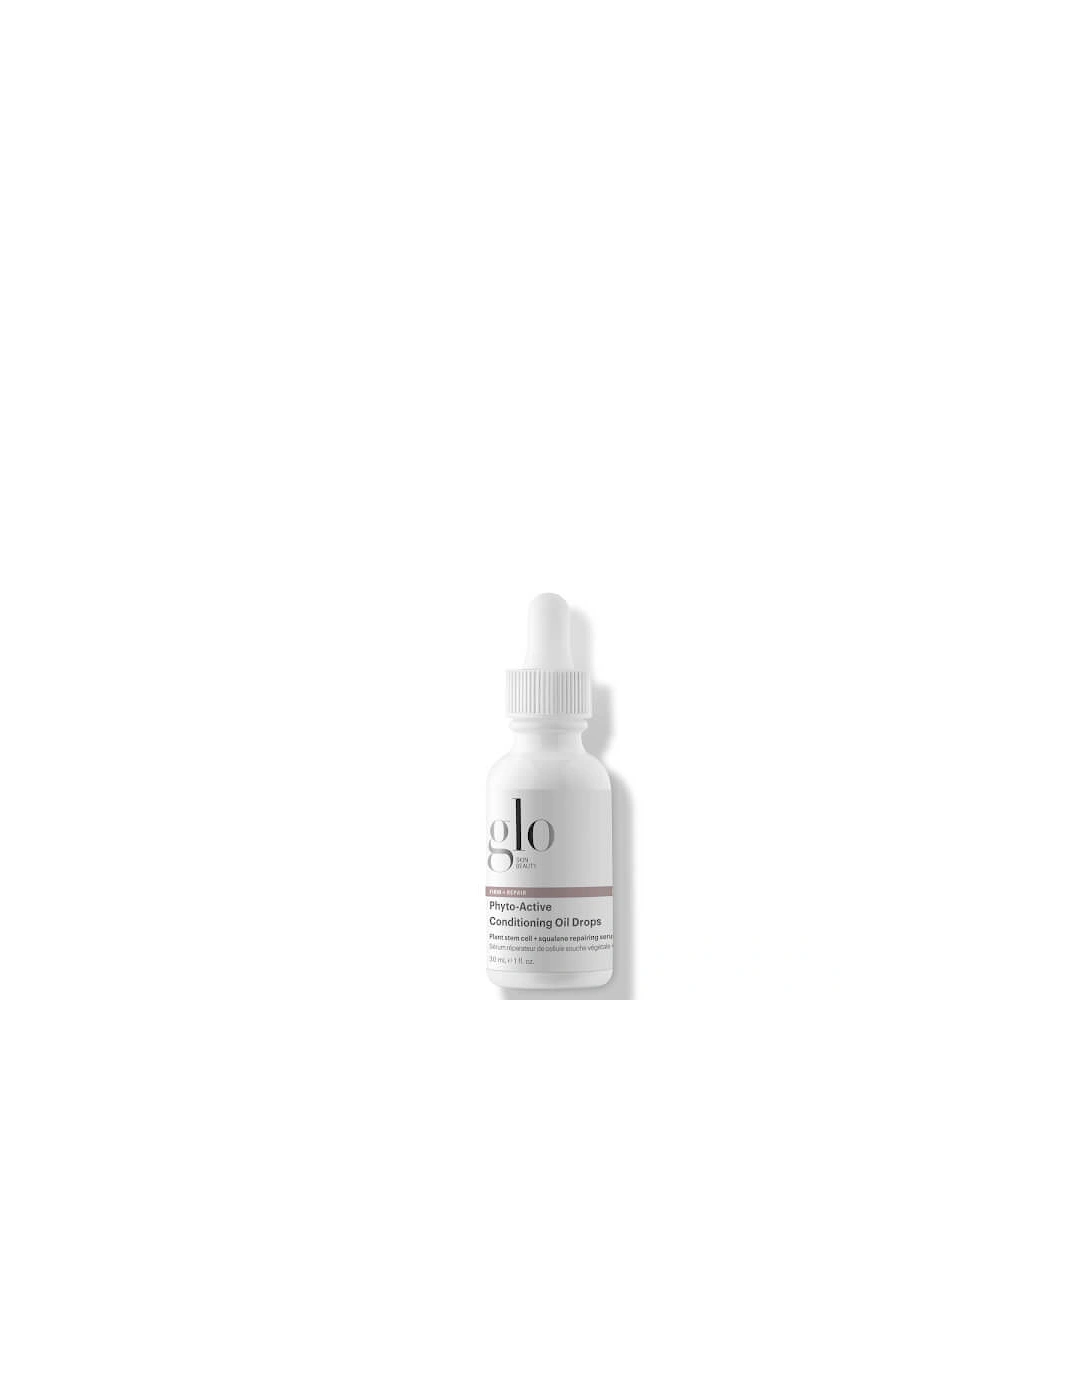 Phyto-Active Conditioning Oil Drops 30ml, 2 of 1